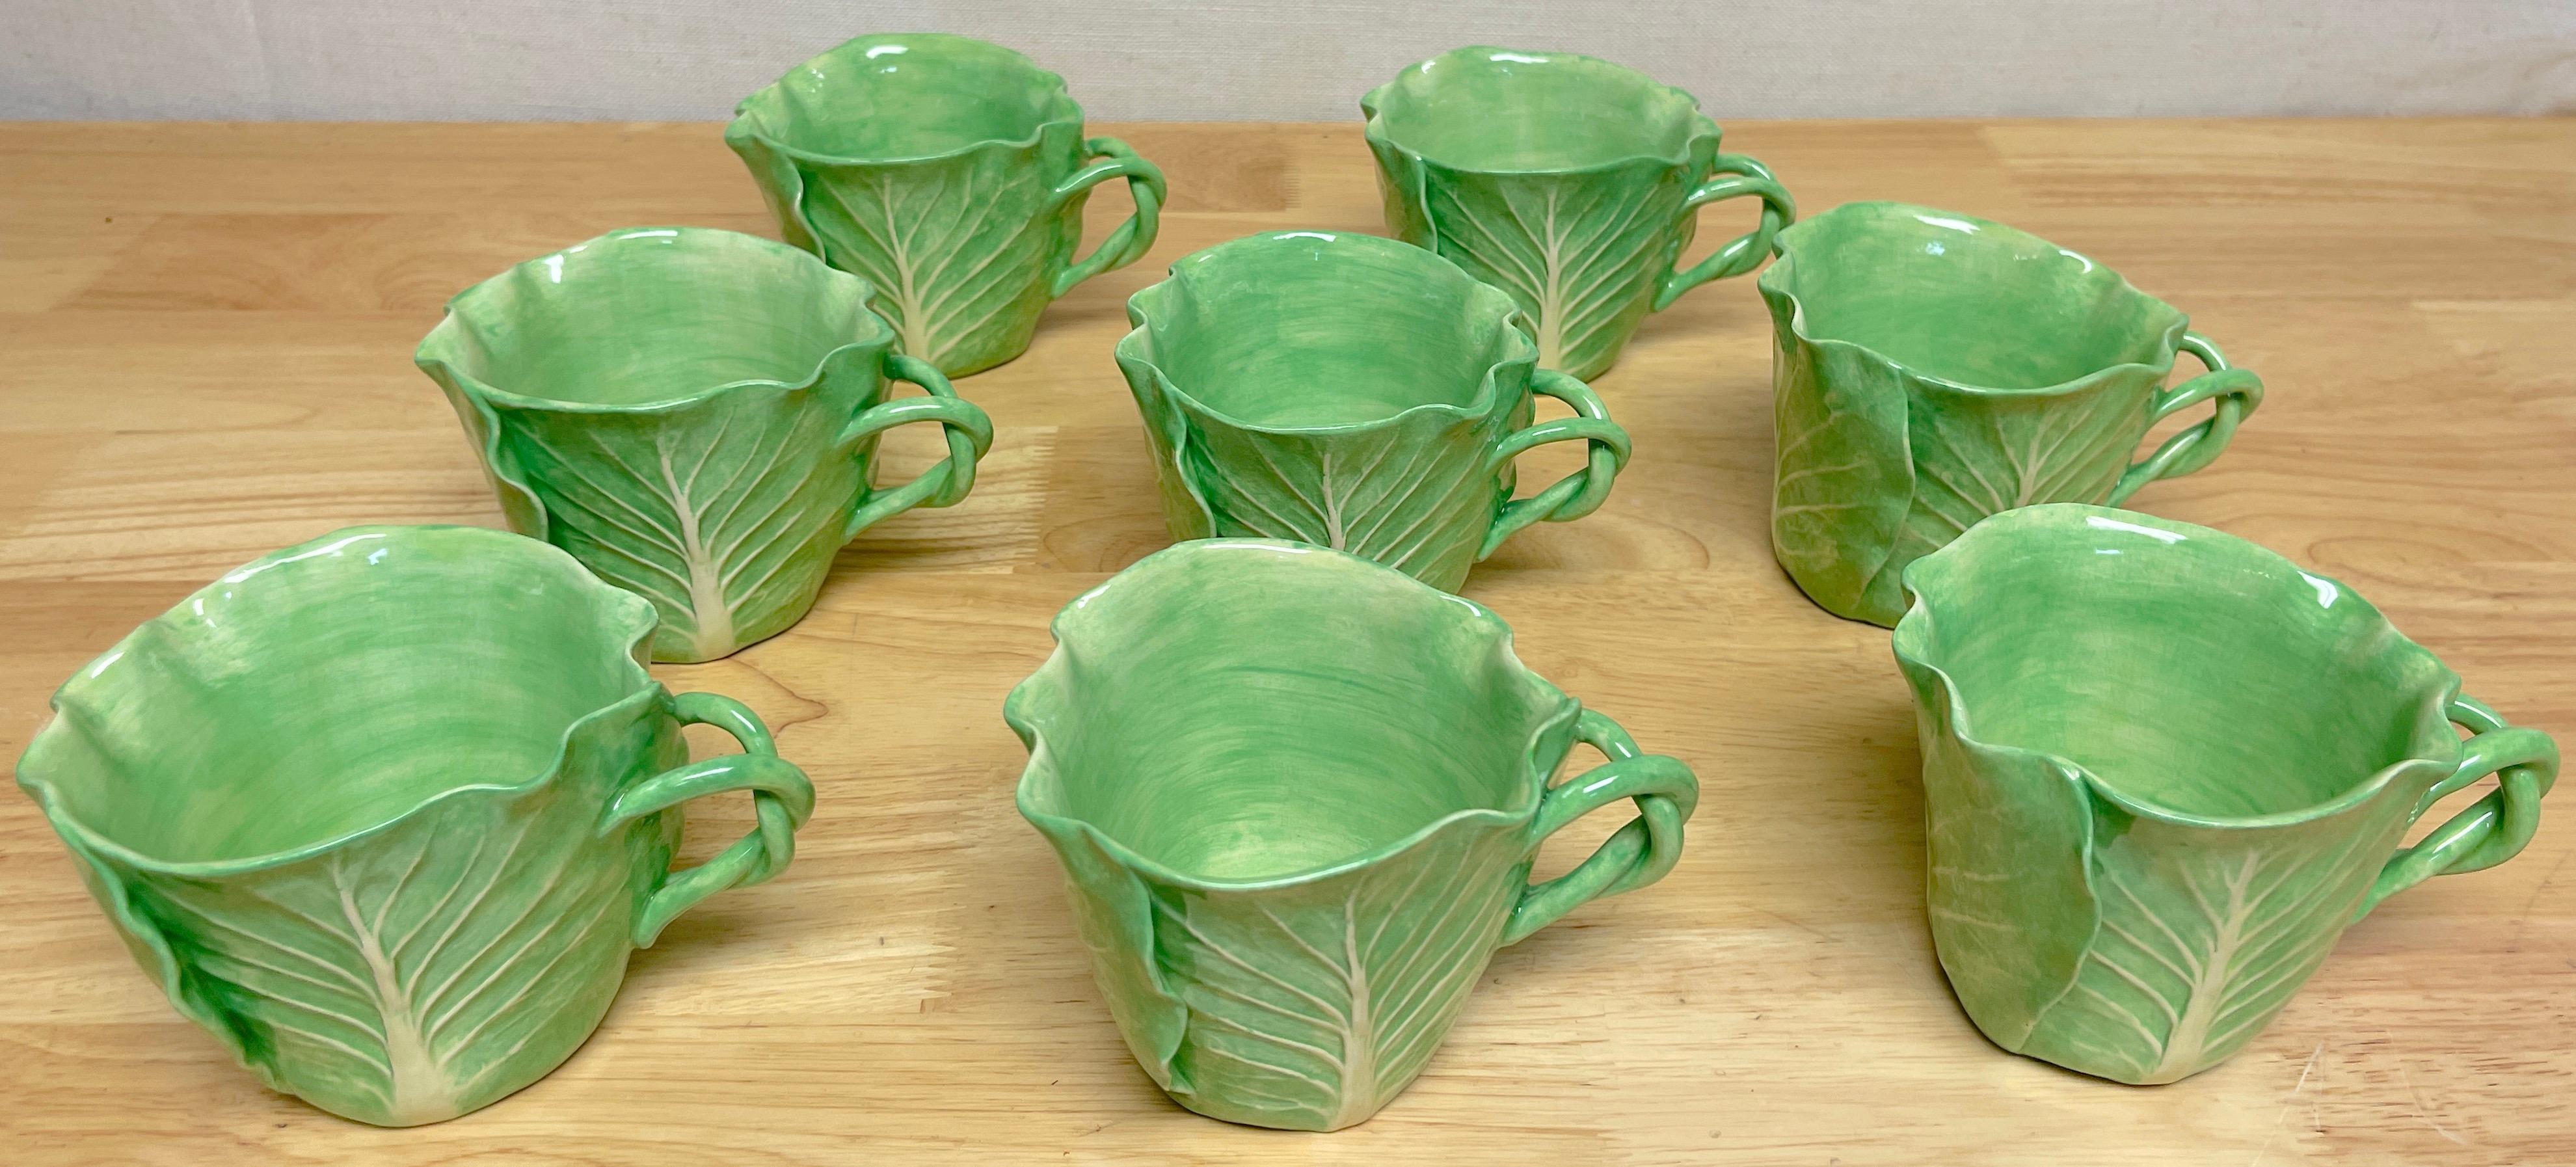 Glazed Dodie Thayer 'Jumbo' Lettuce Leaf Cup & Saucer, 5 Available, Sold Individually